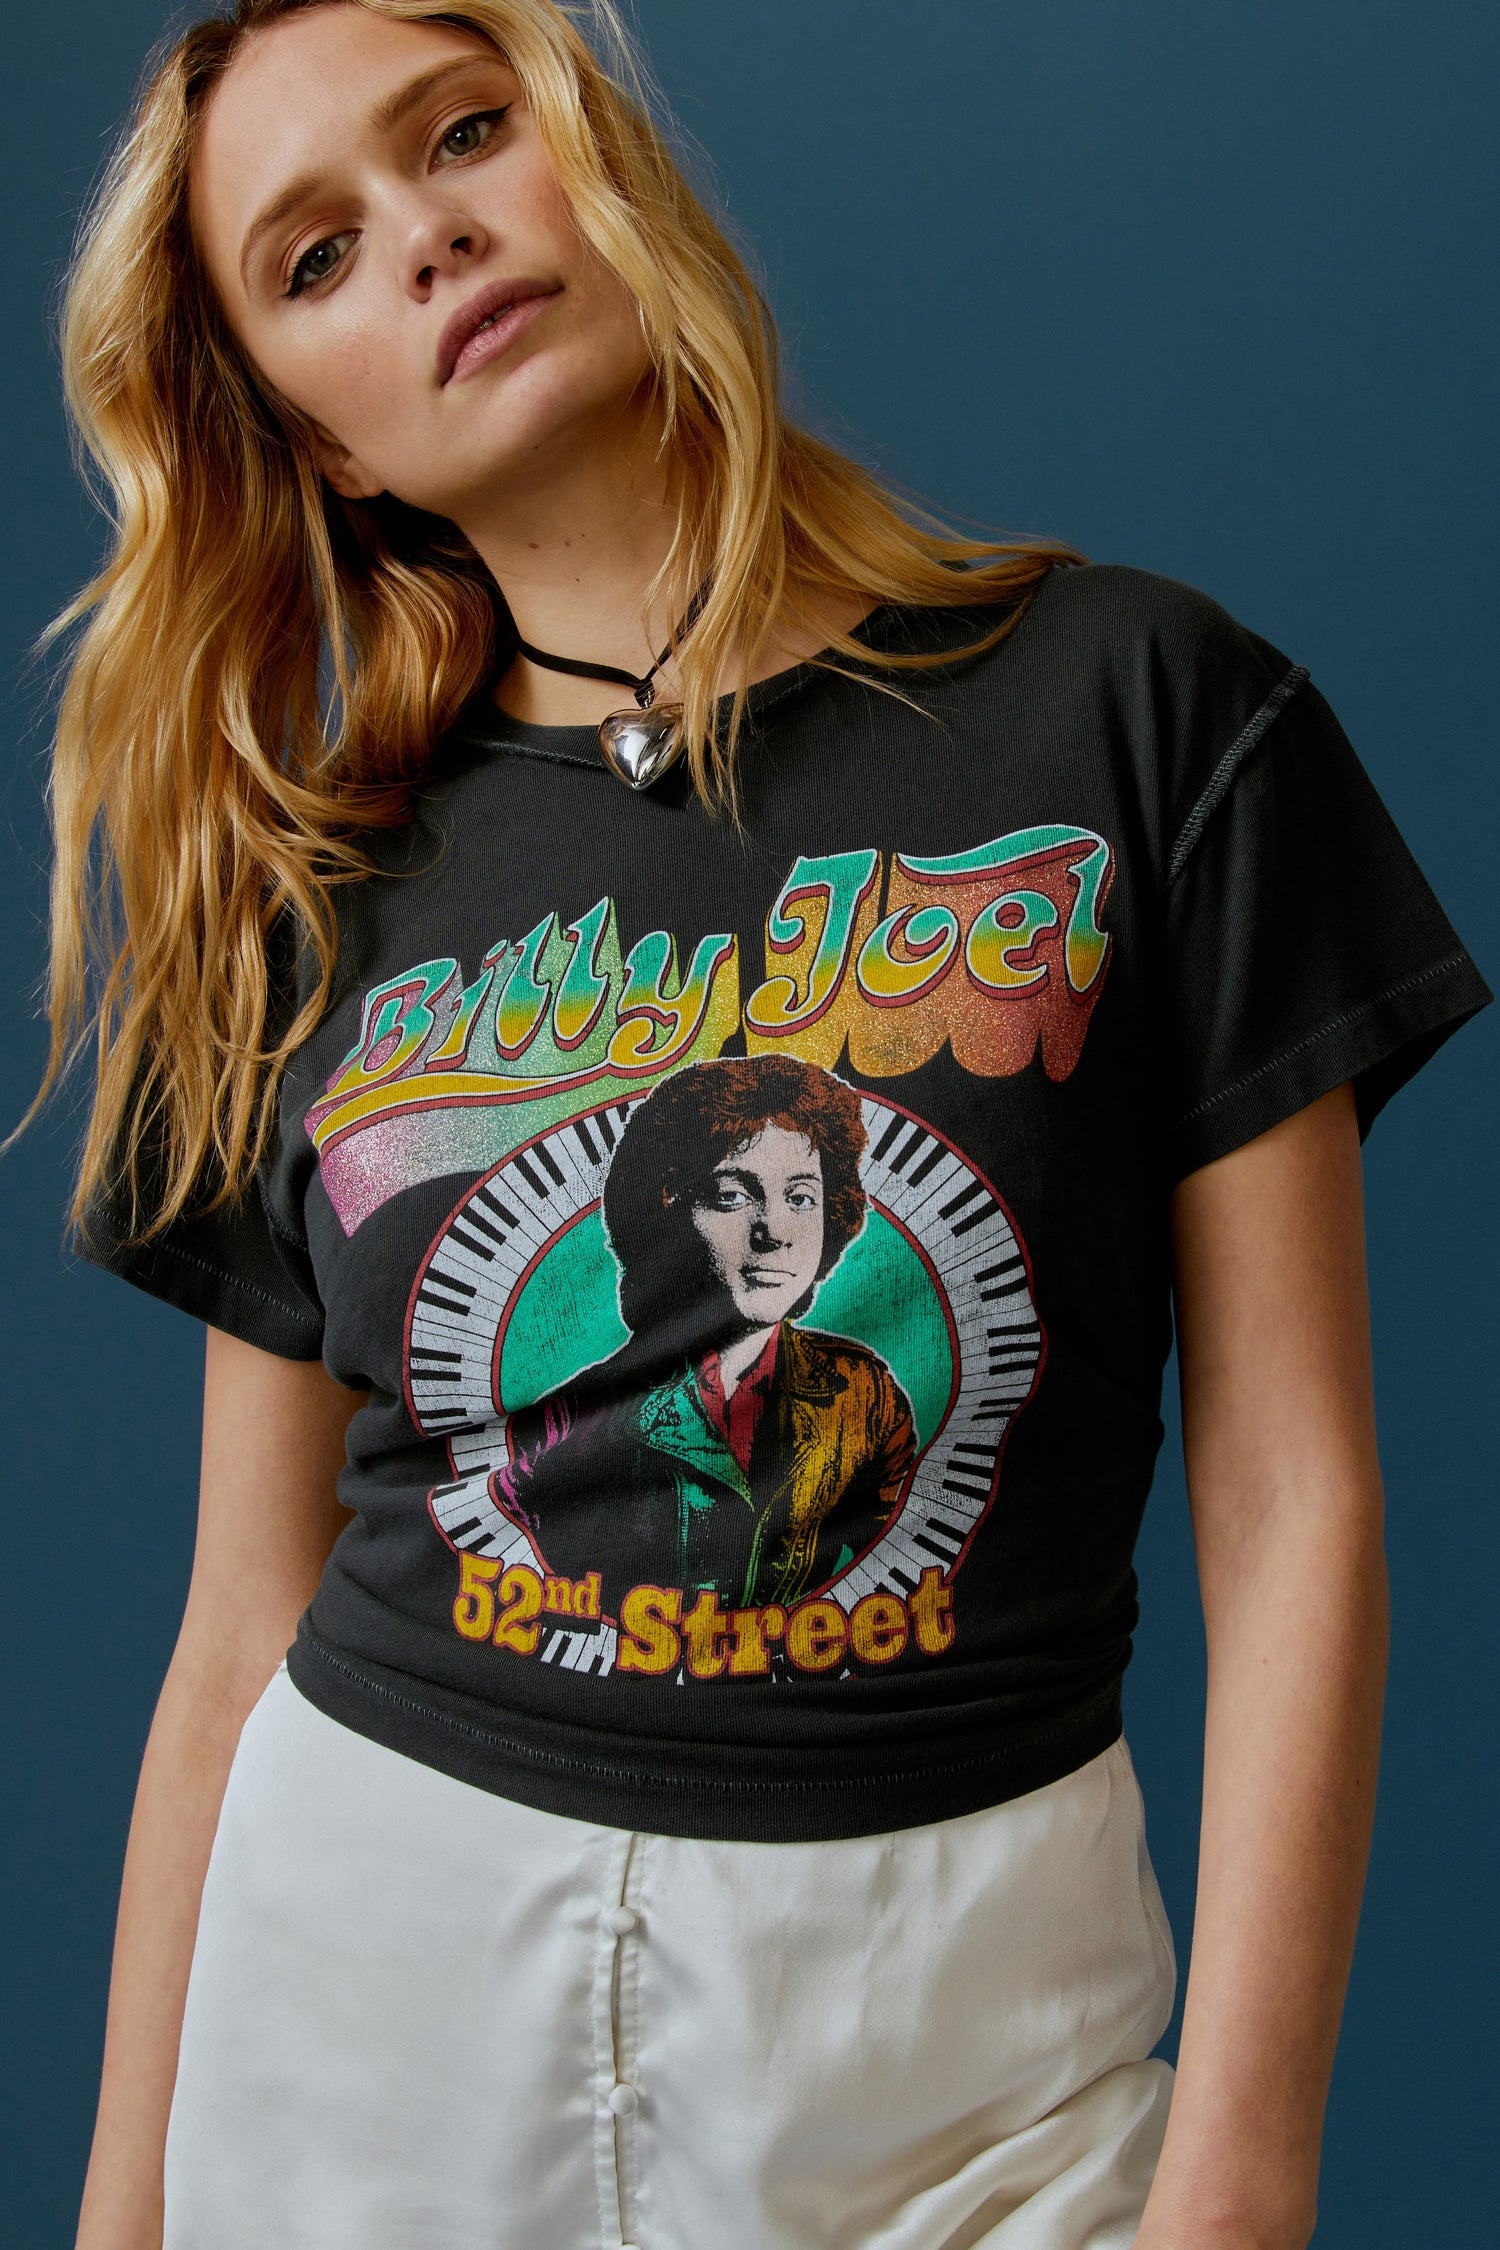 A blonde-haired model featuring a black tee stamped with 'Billy Joel' in blue, green, and yellow gradient letters, along with a portrait of the artist in the center.